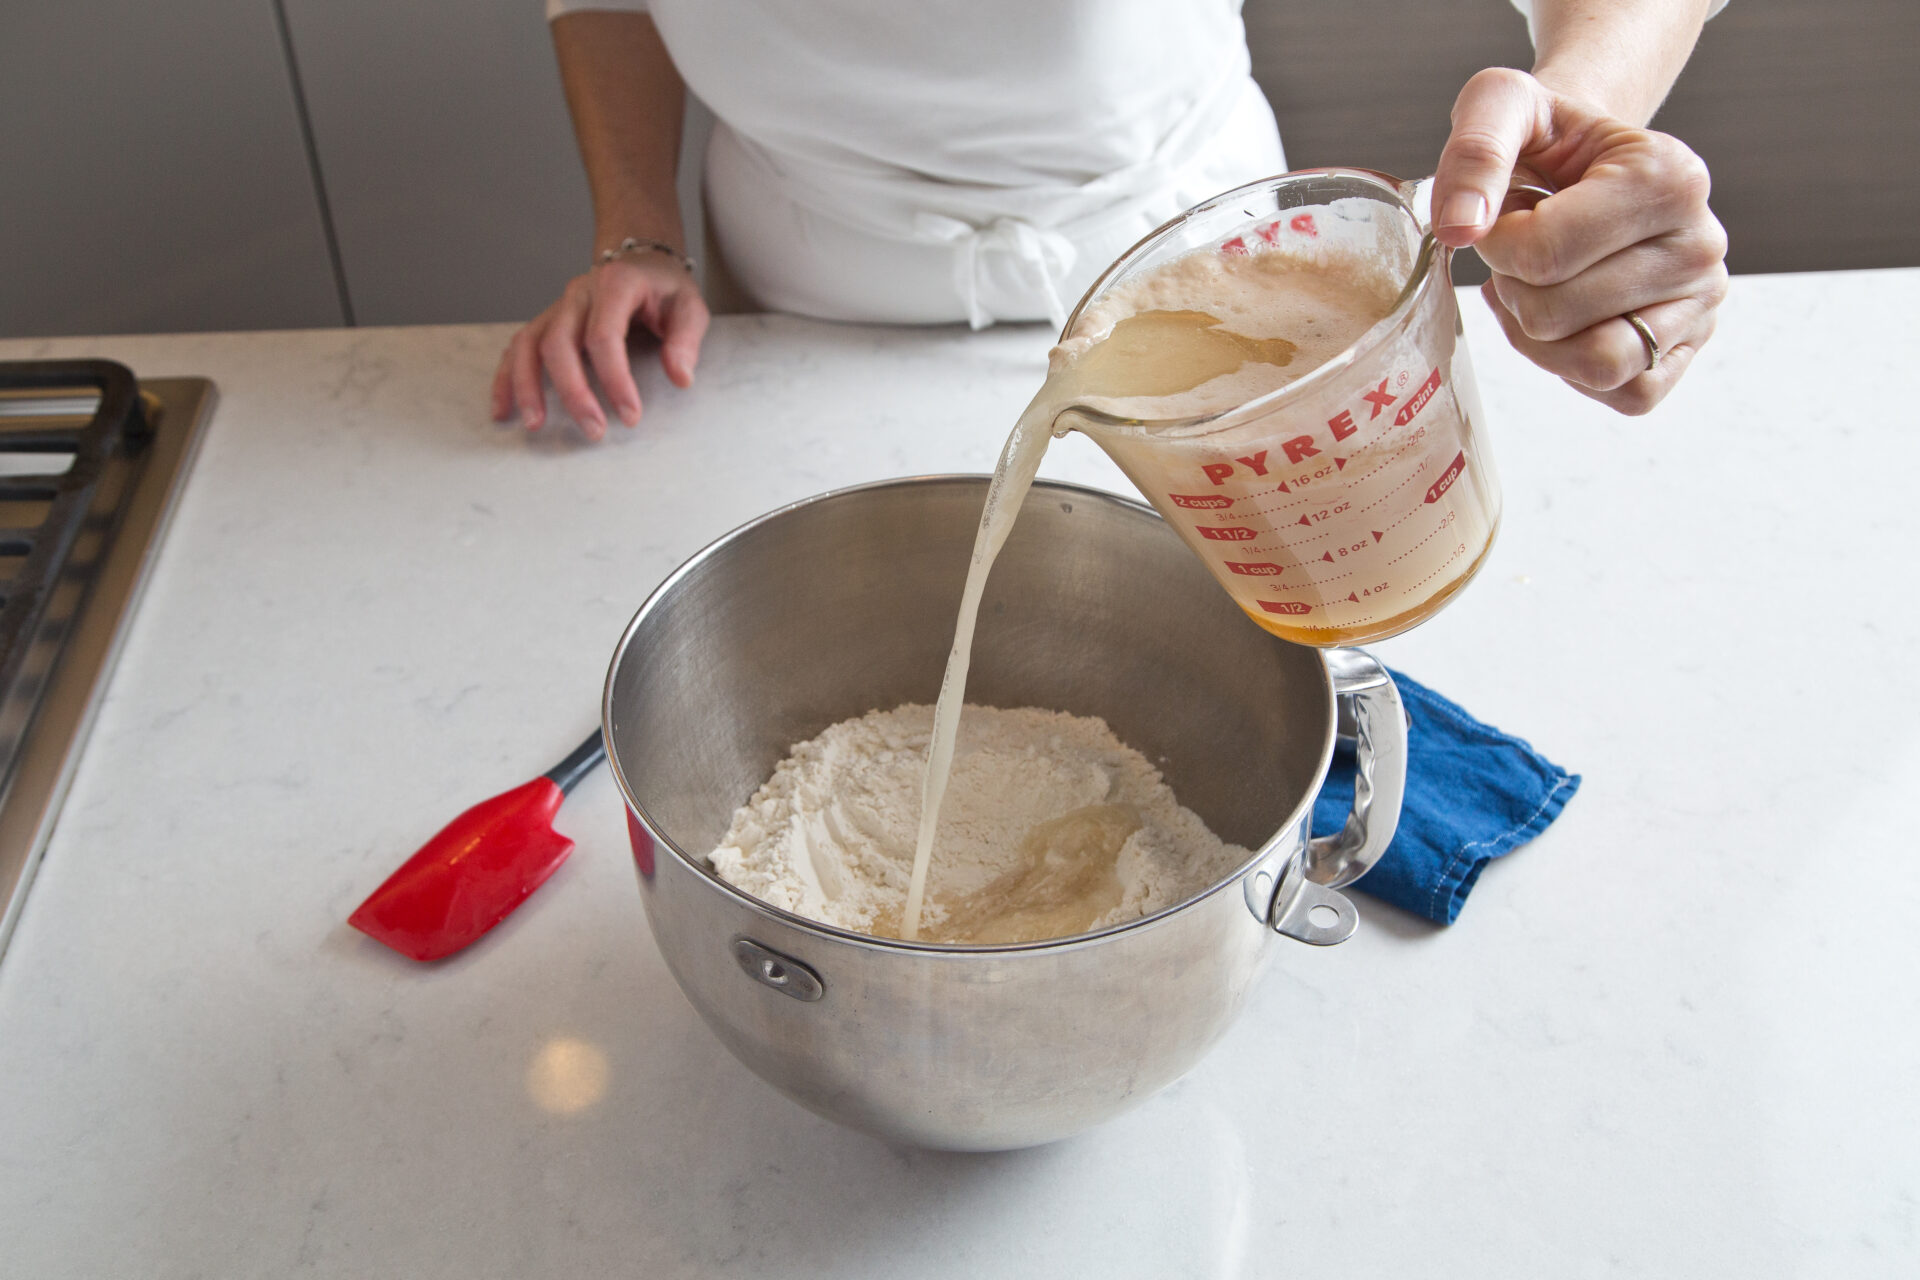 Challah Step 1: Blooming the yeast